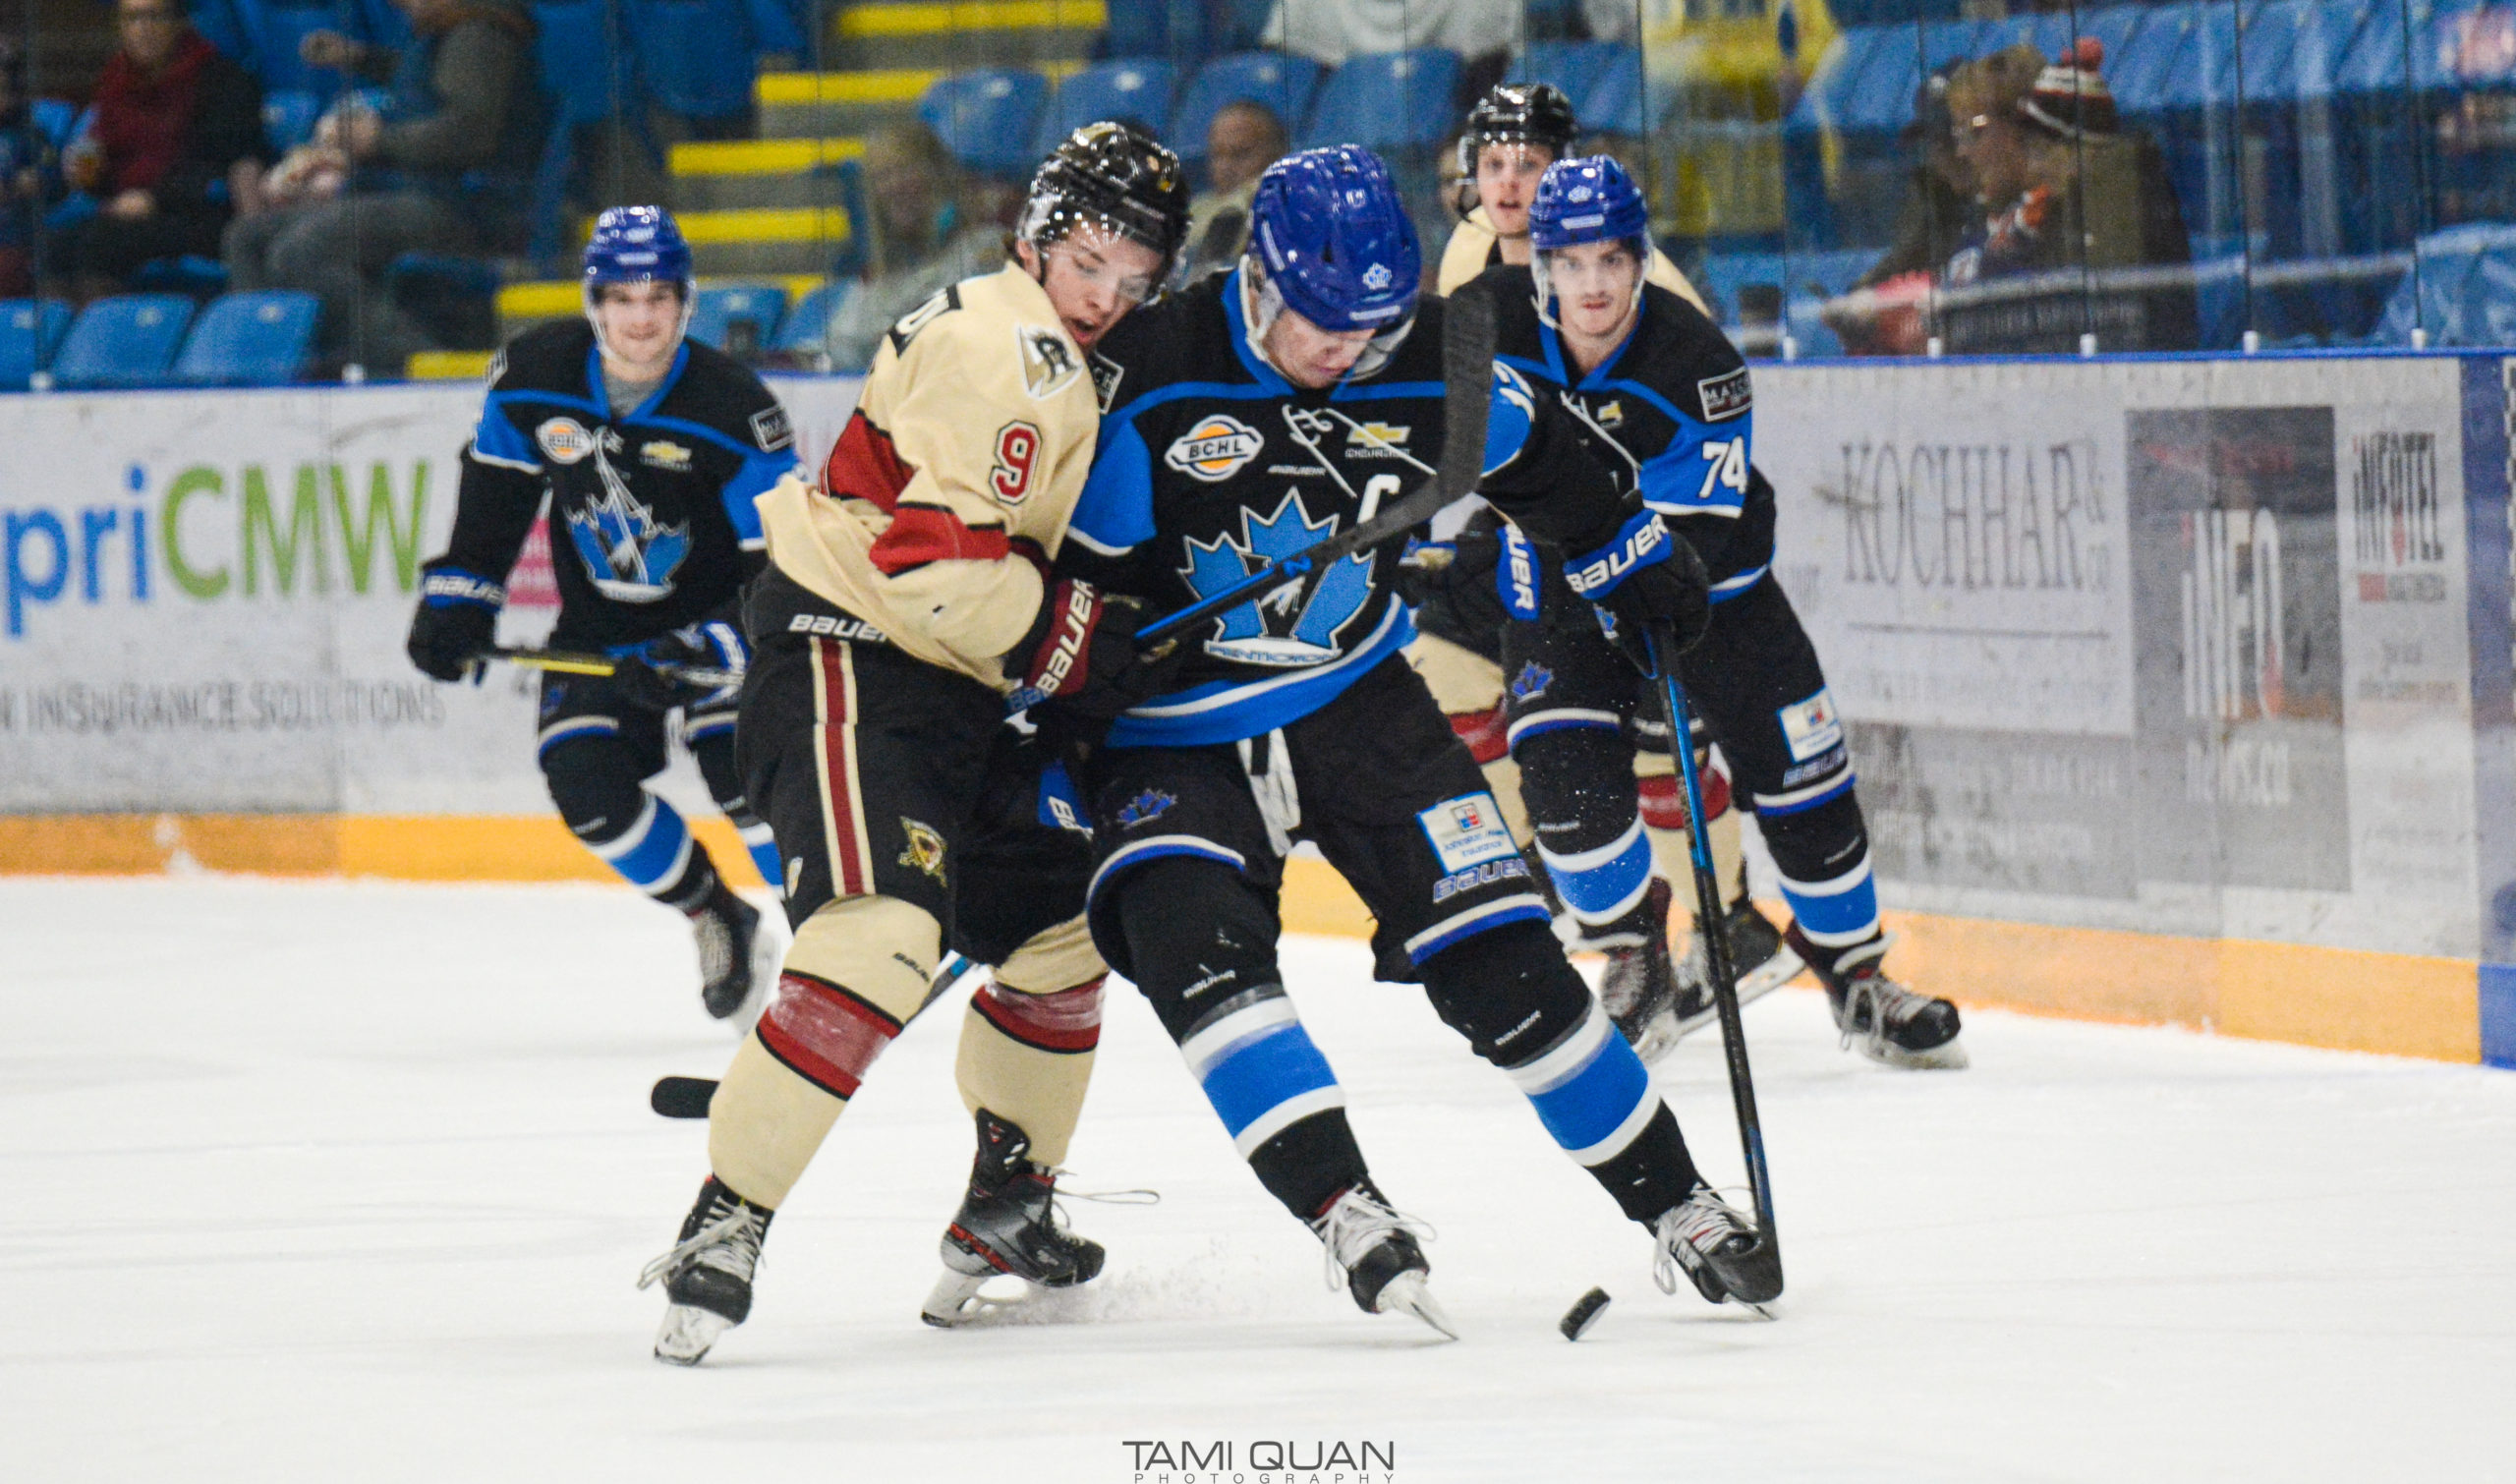 Captain David Silye try's to fend off a West Kelowna Warriors player in an effort to keep possession of the puck.